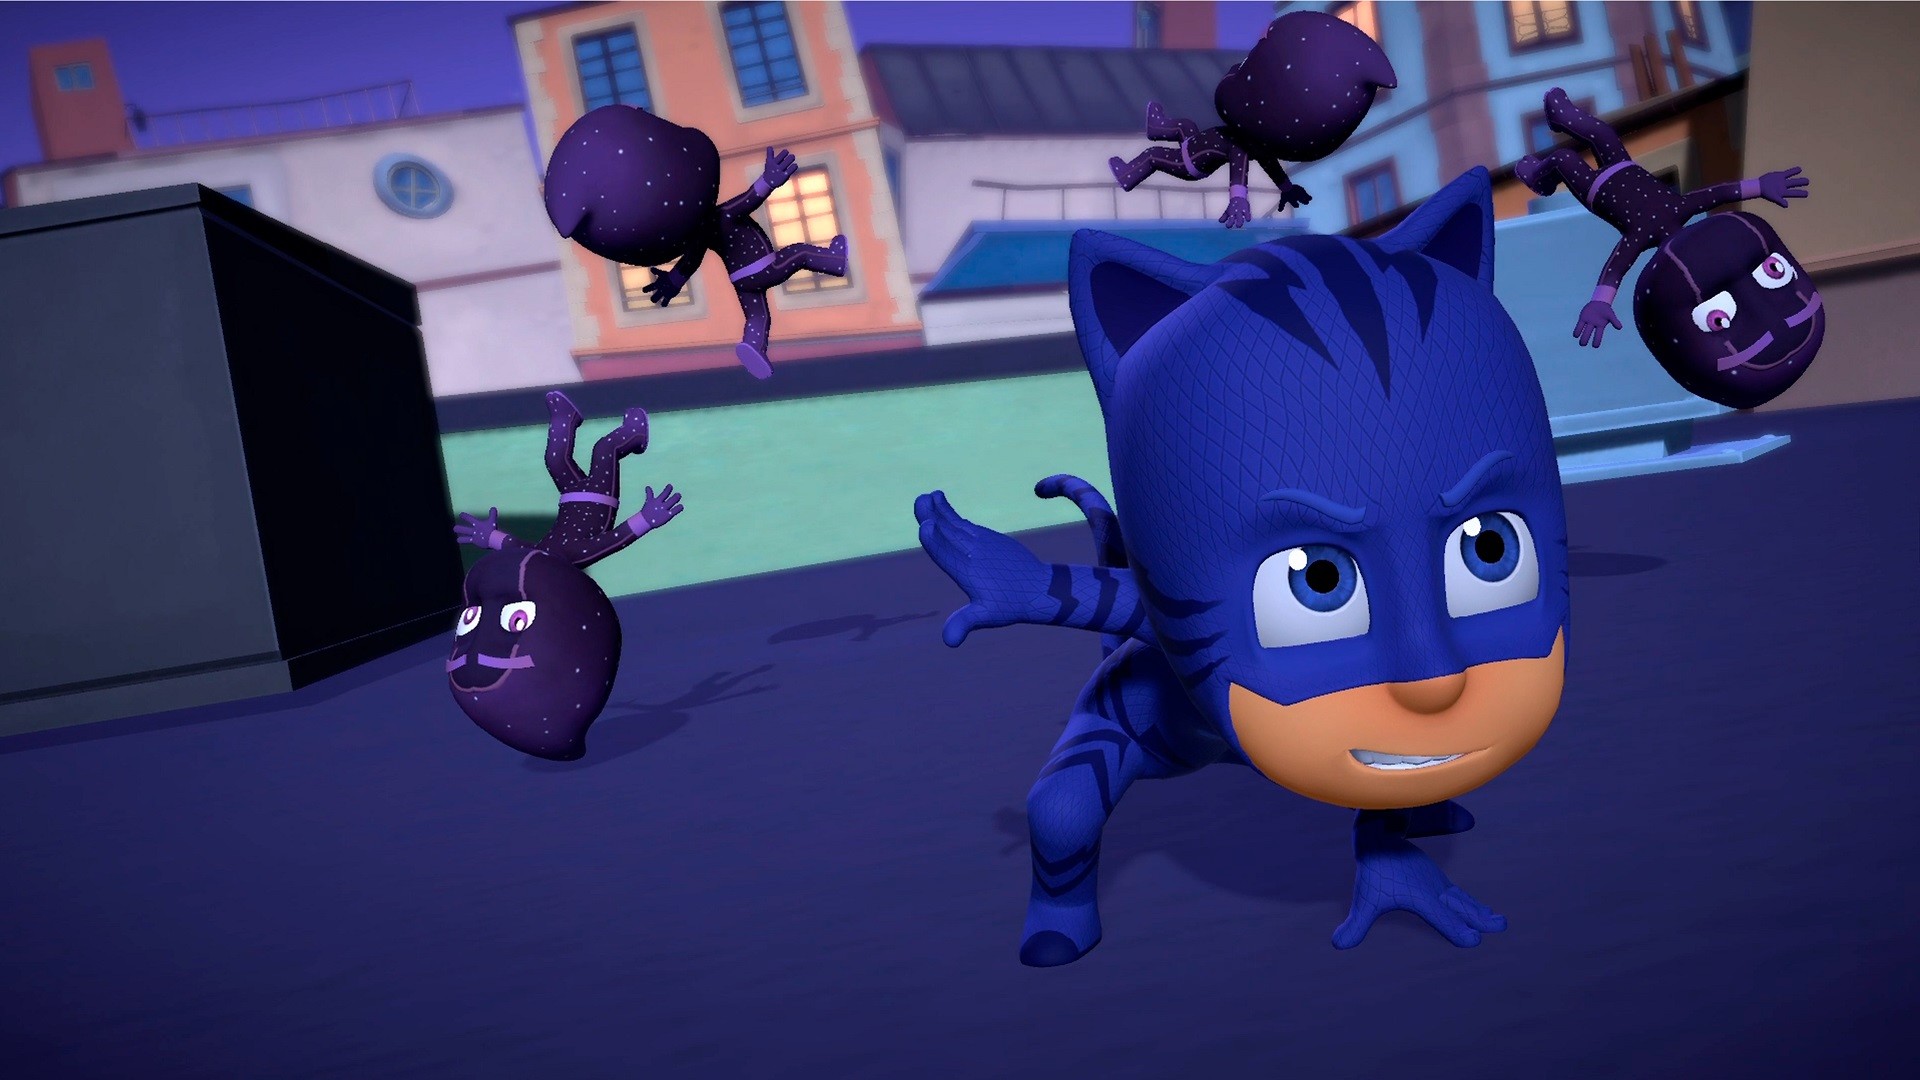 PJ MASKS: HEROES OF THE NIGHT Free Download